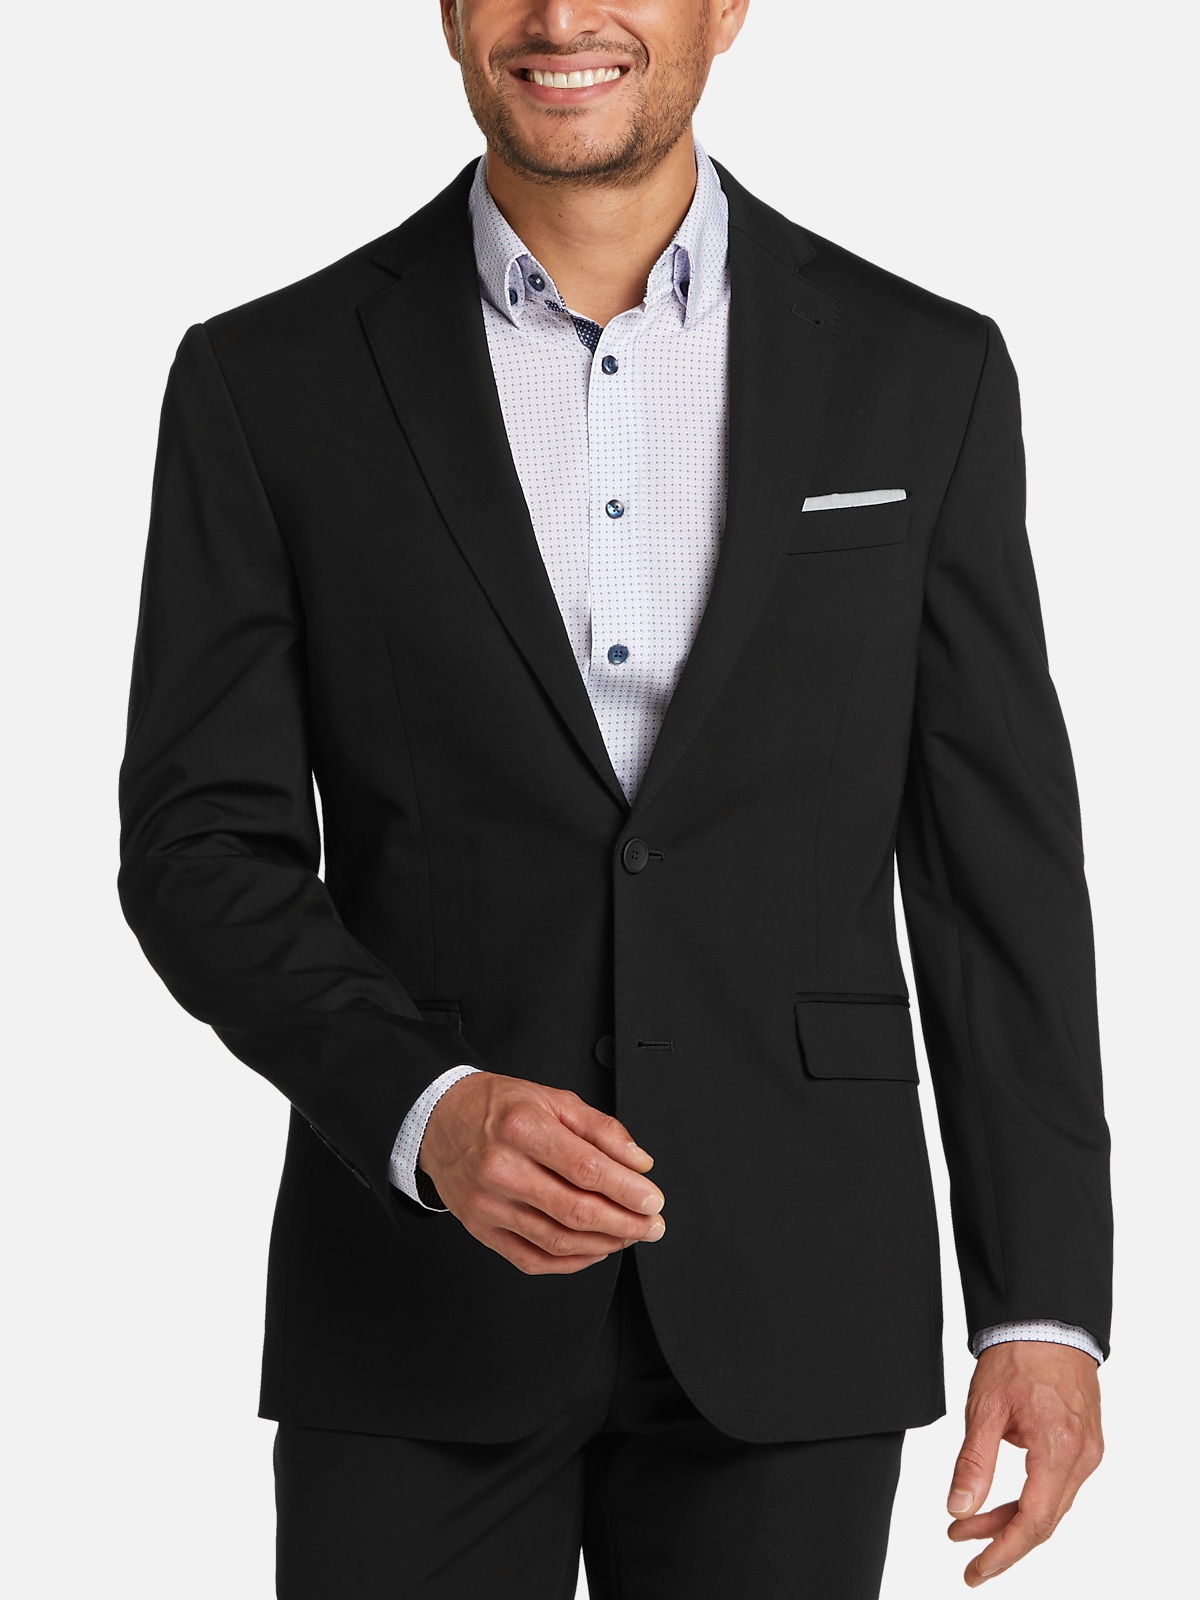 Awearness Kenneth Cole Knit Slim Fit Suit Separates Solid Coat | All Sale|  Men's Wearhouse